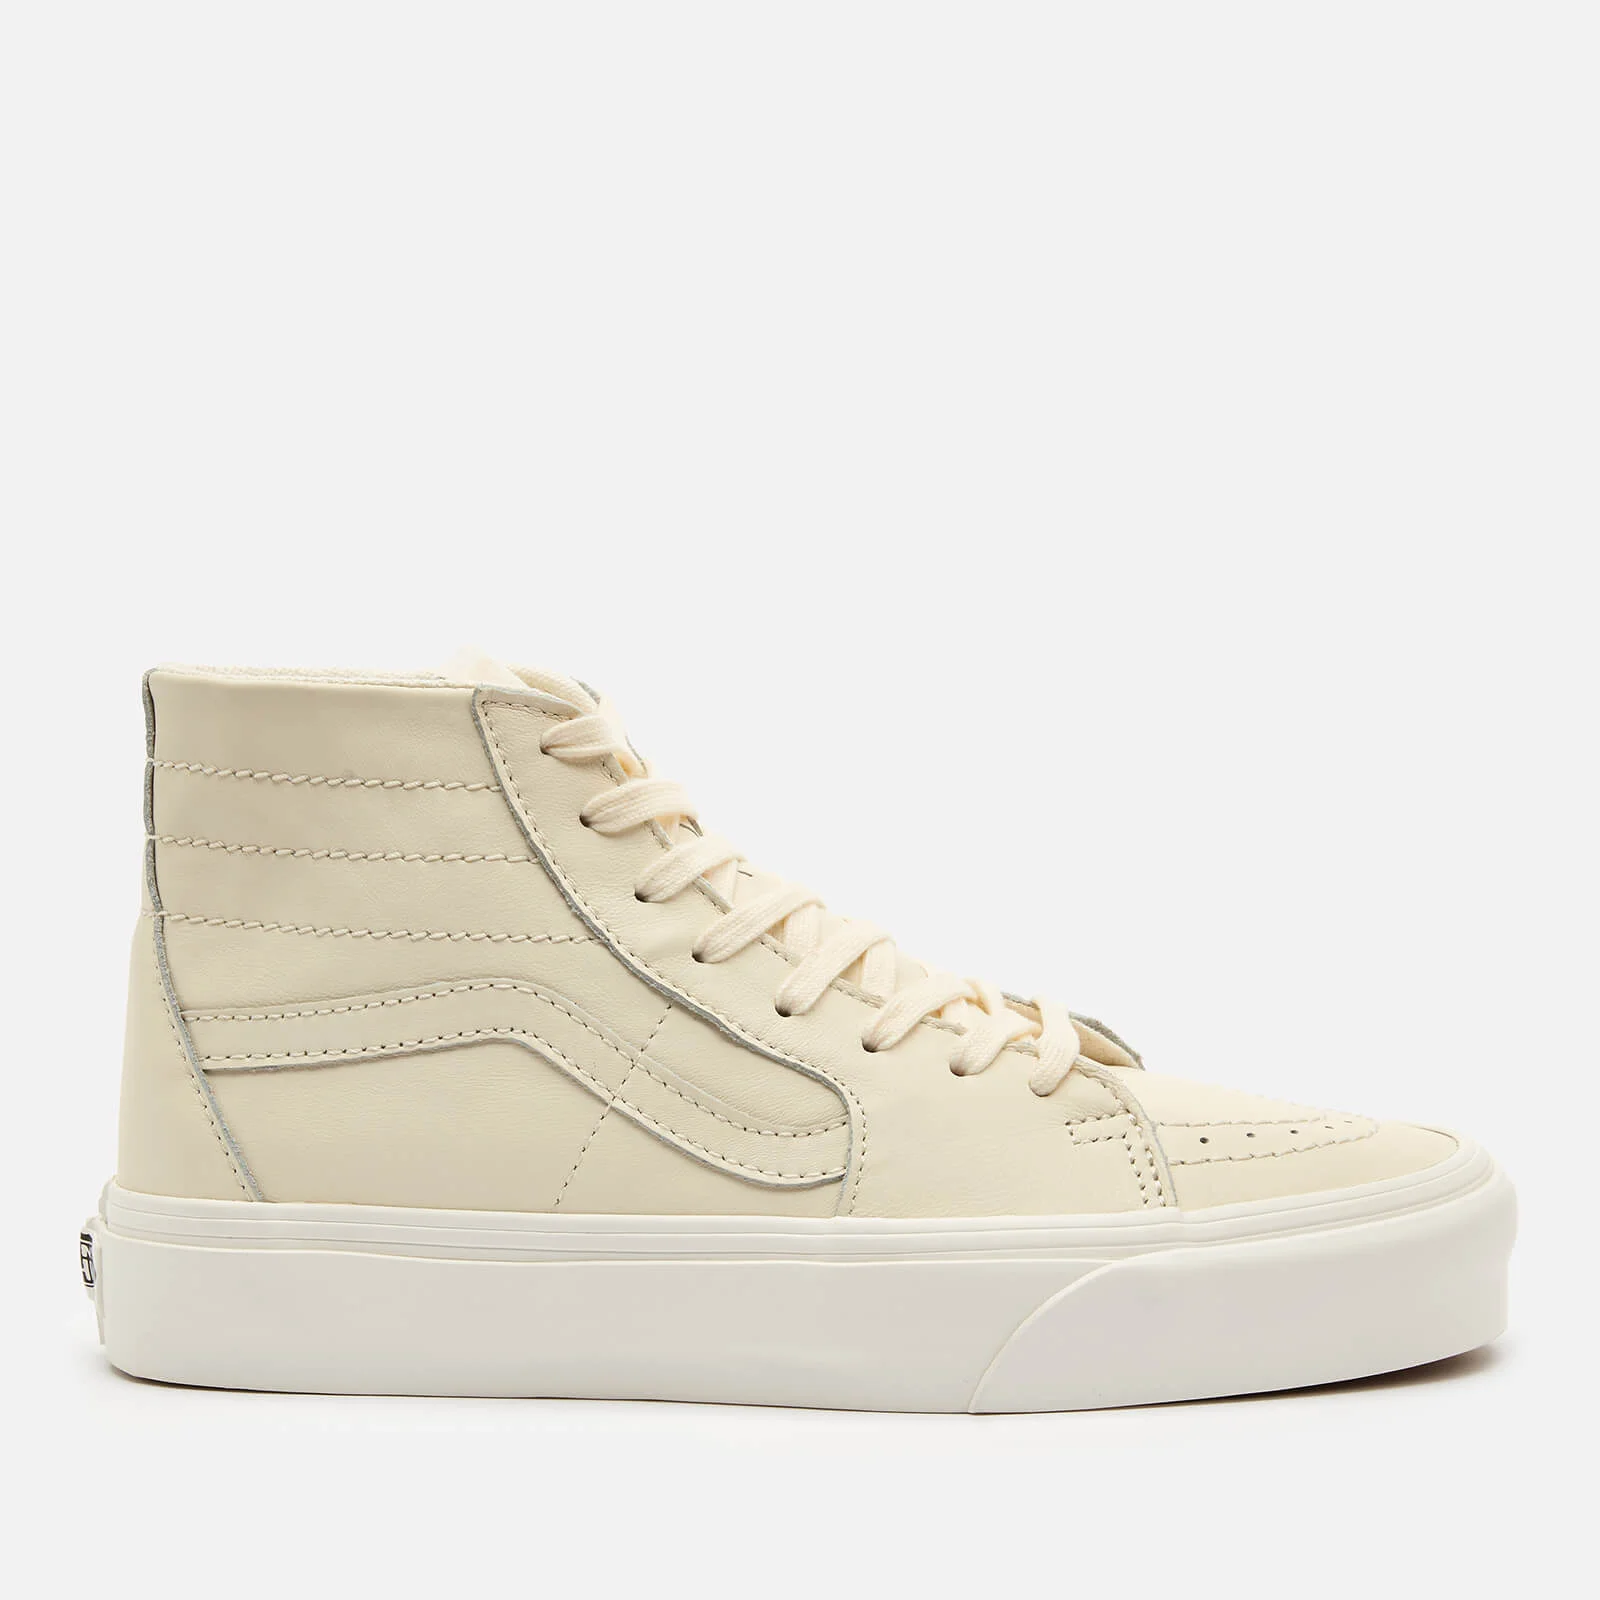 Vans Women's Sk8-Hi Tapered Leather Trainers - Marshmallow/Snow White Image 1